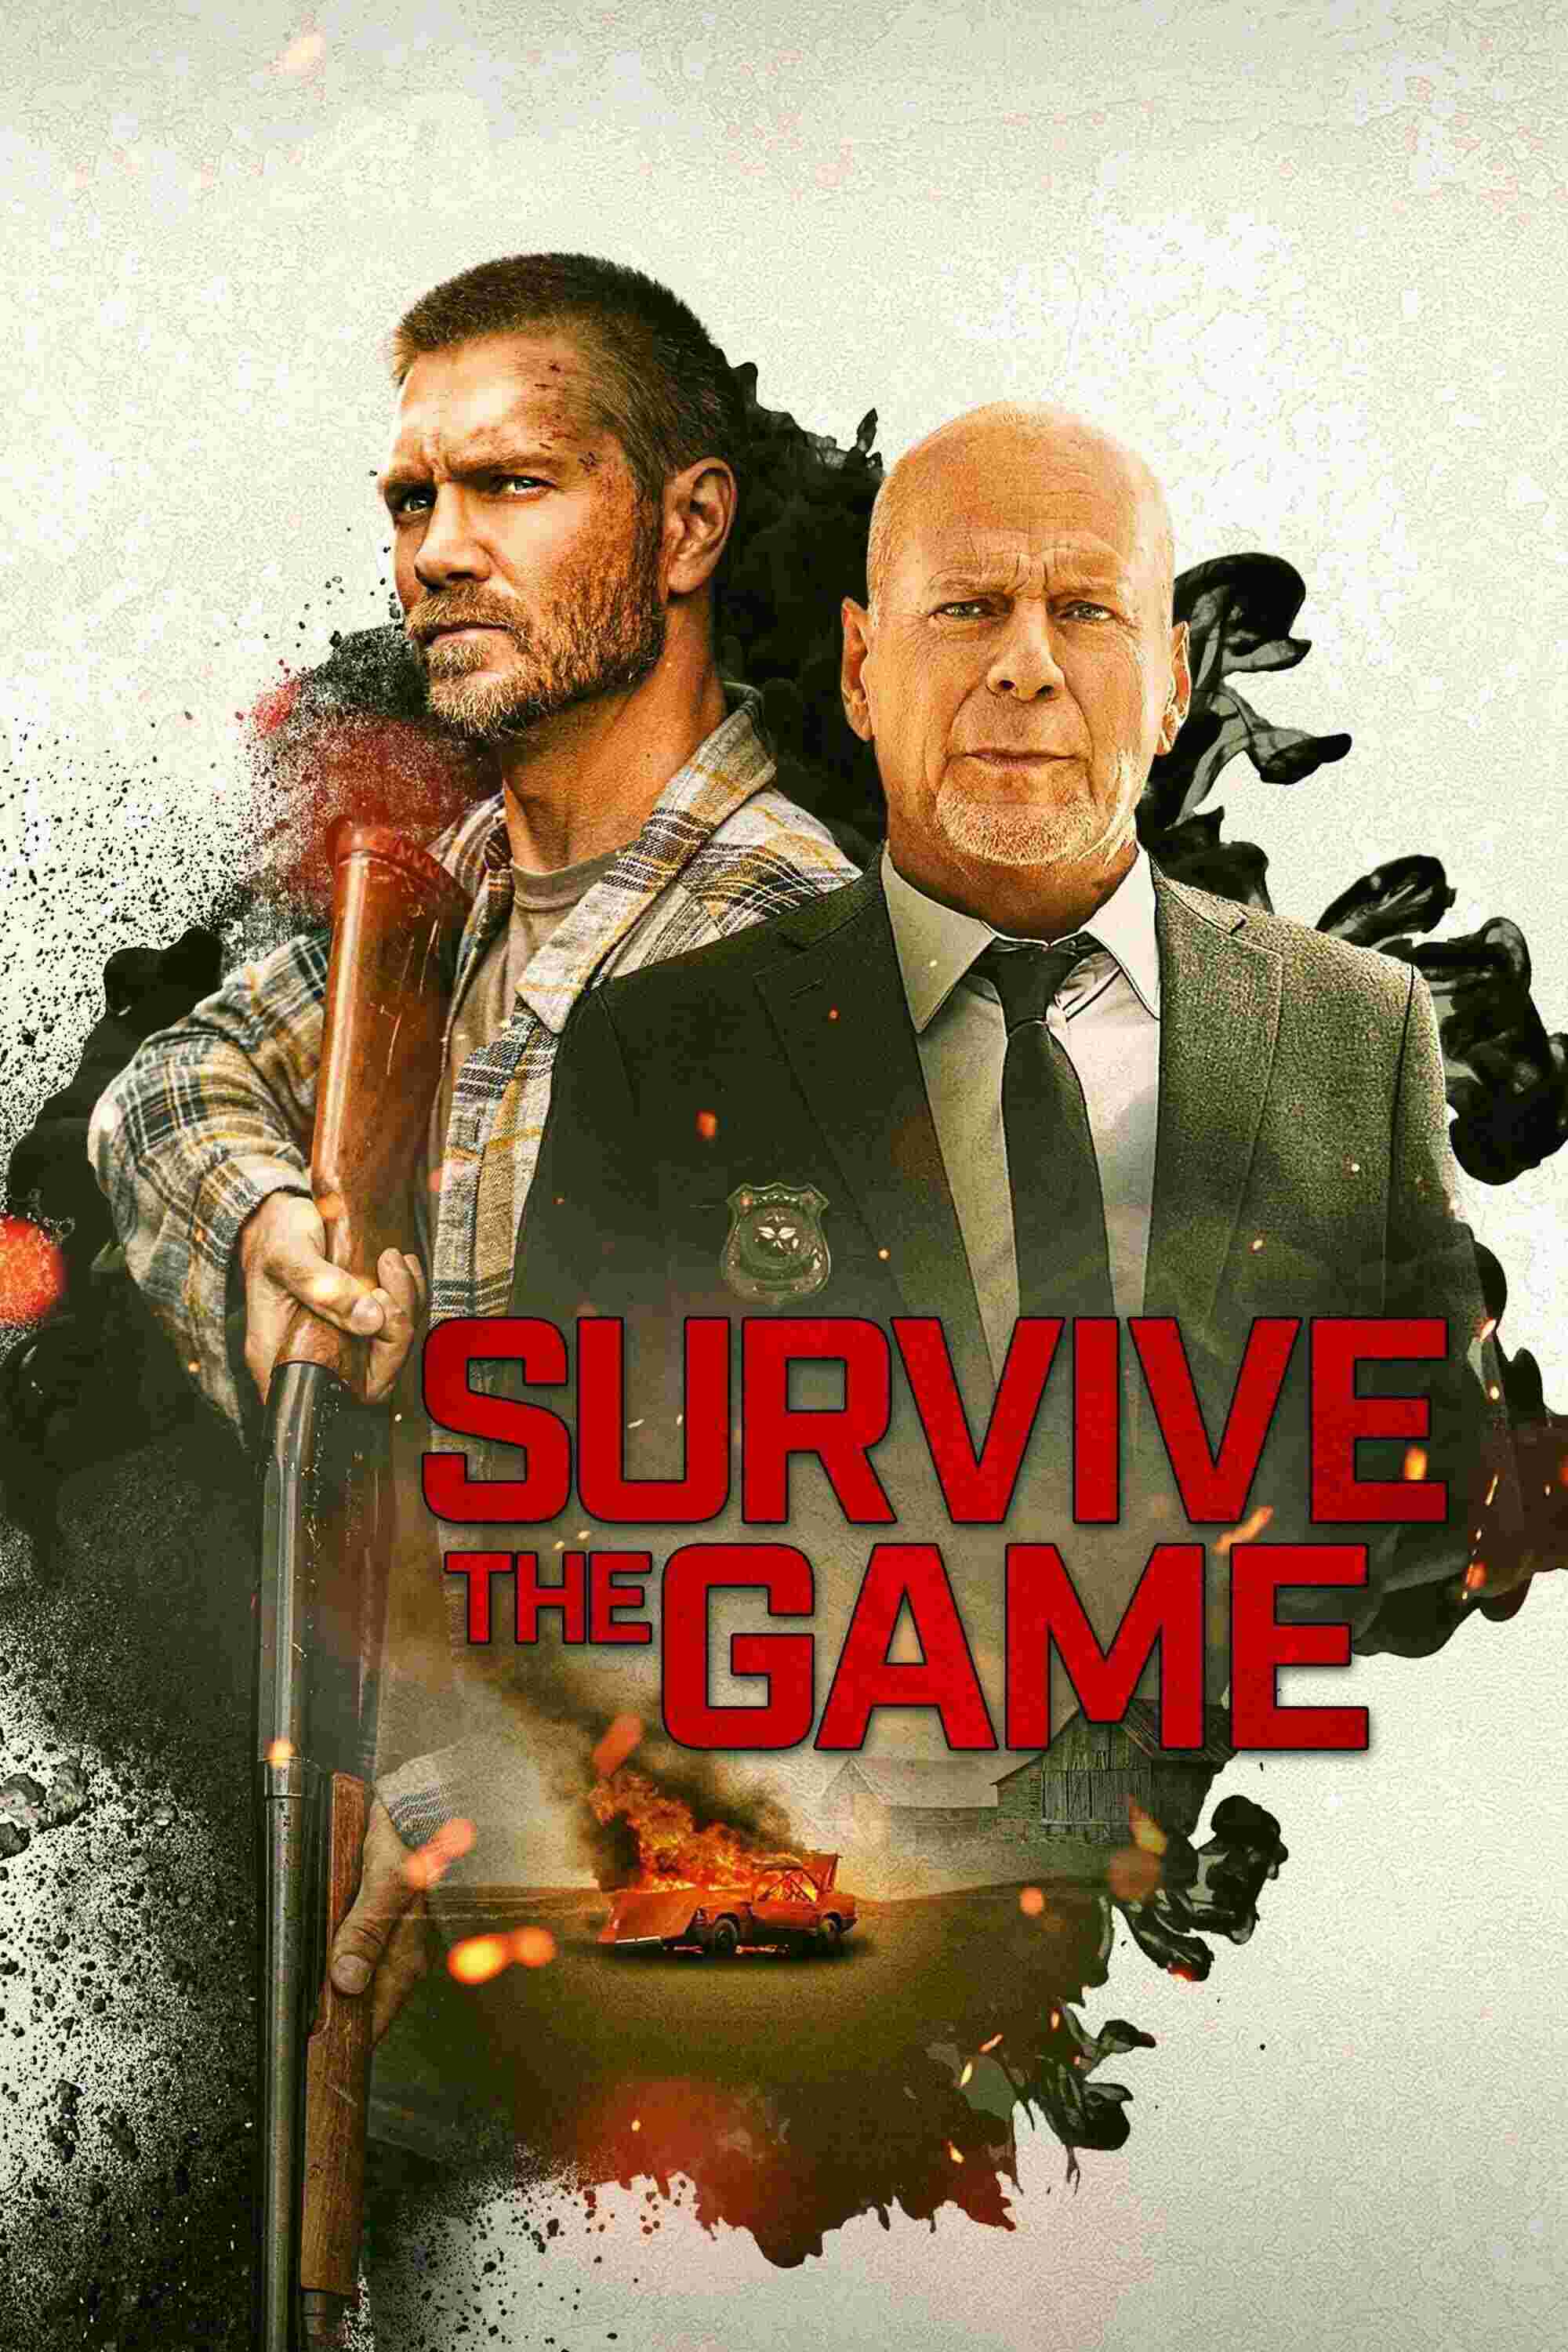 Survive the Game (2021) Chad Michael Murray